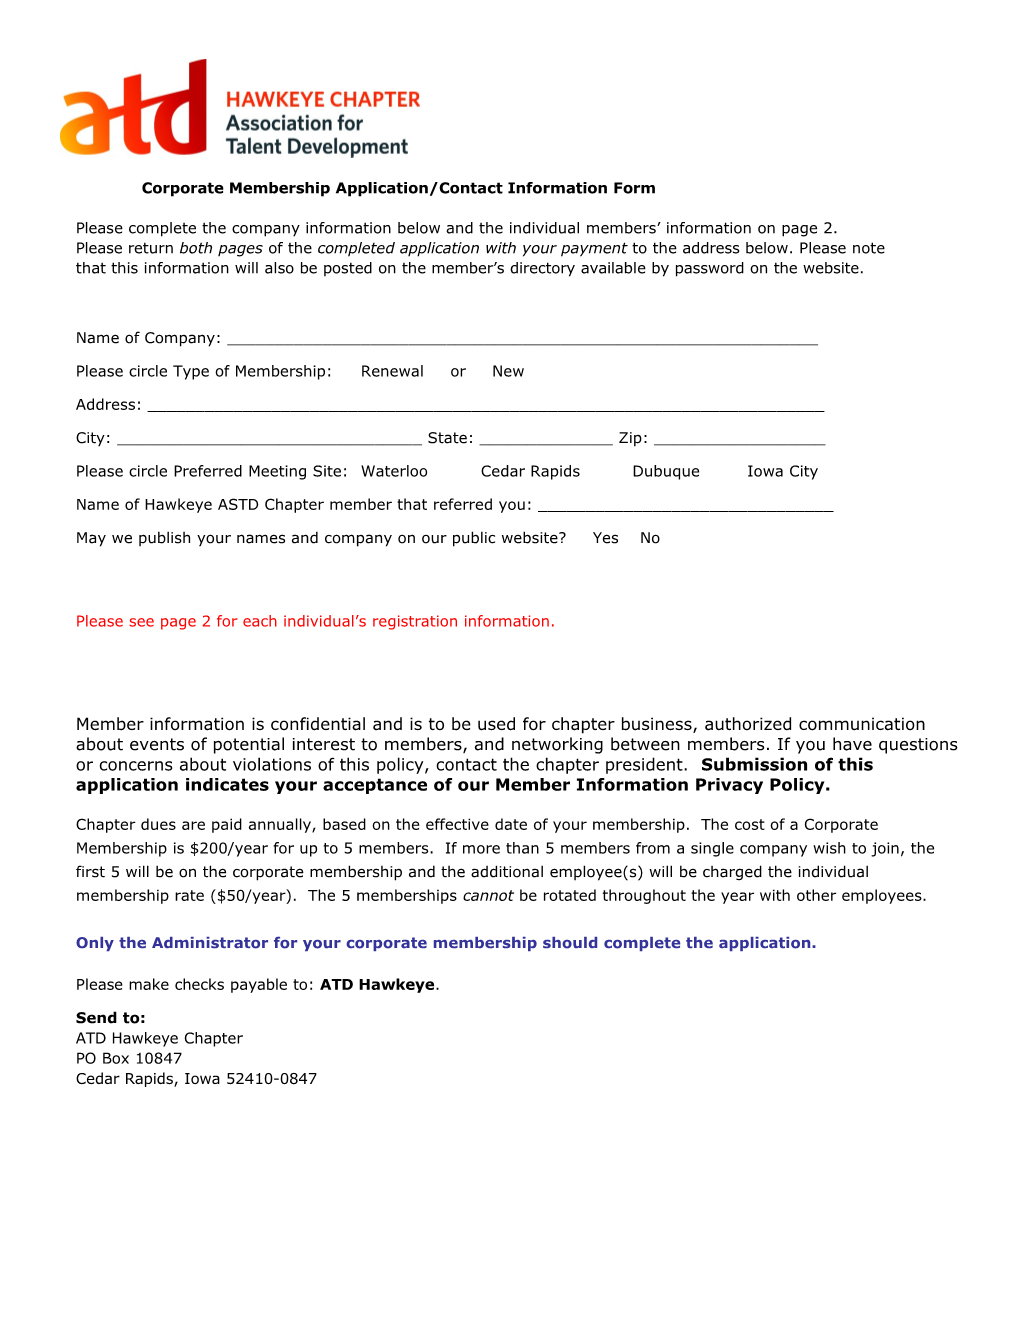 Corporate Membership Application/Contact Information Form